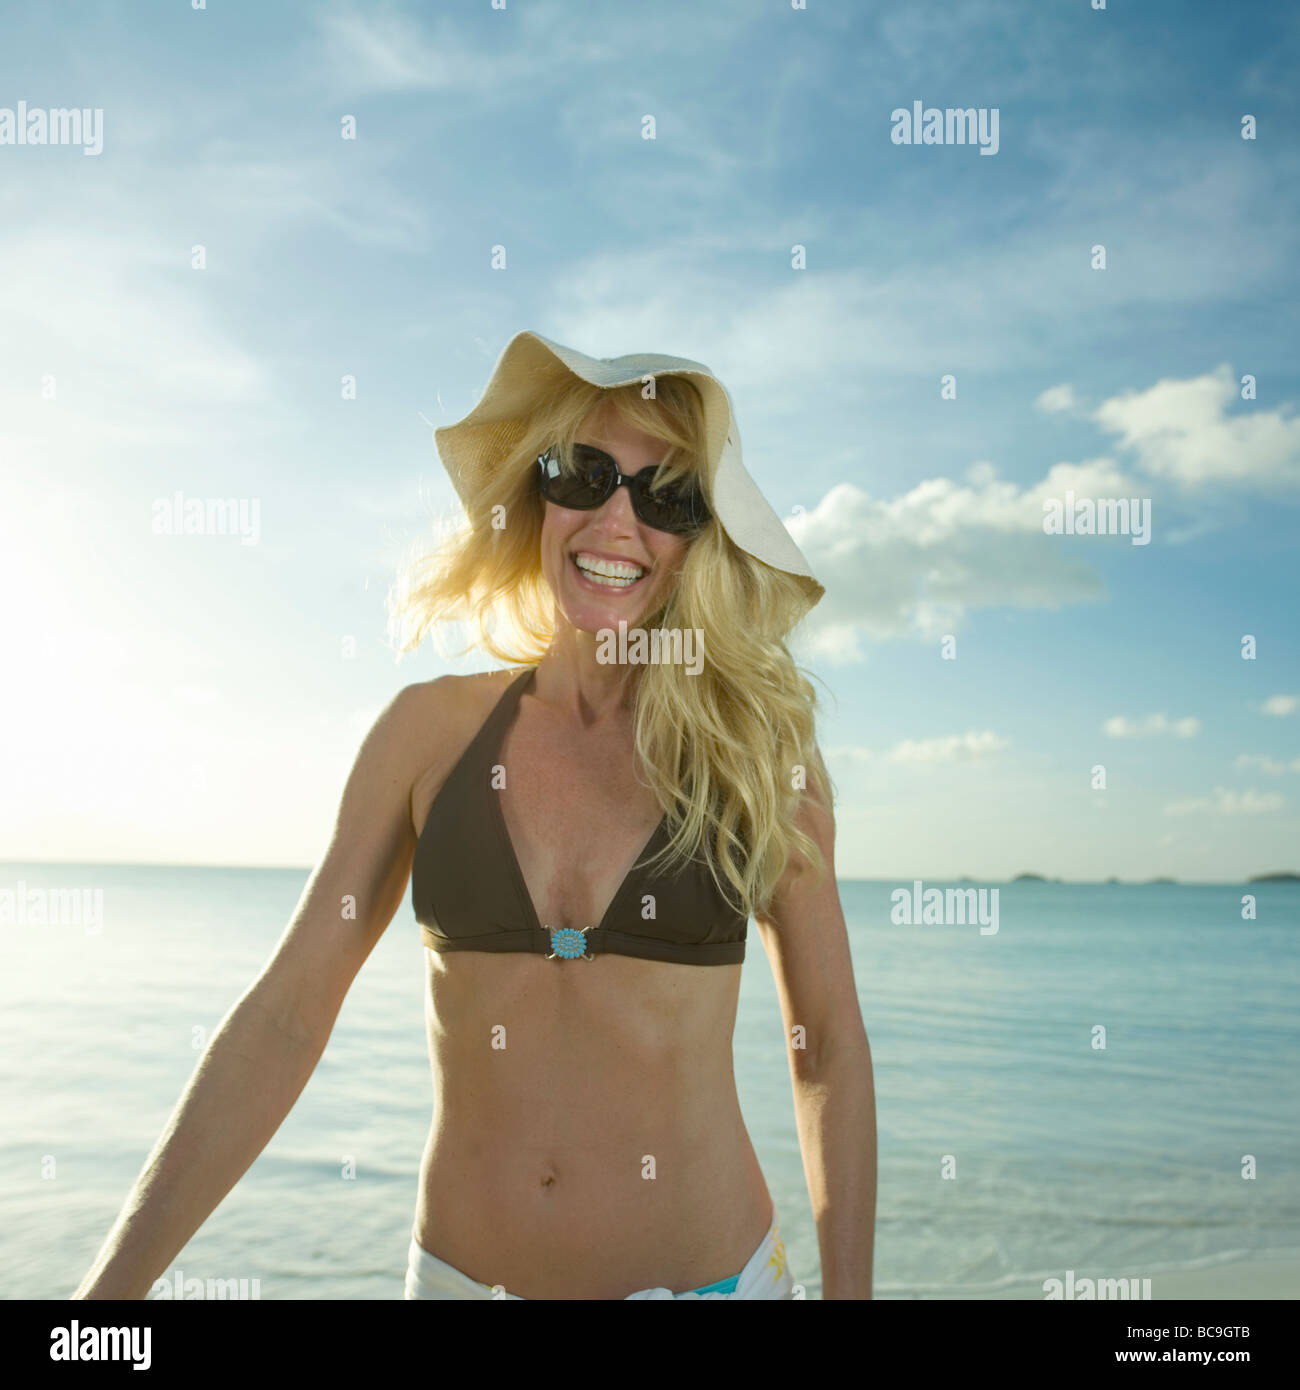 Woman smiling on beach Banque D'Images